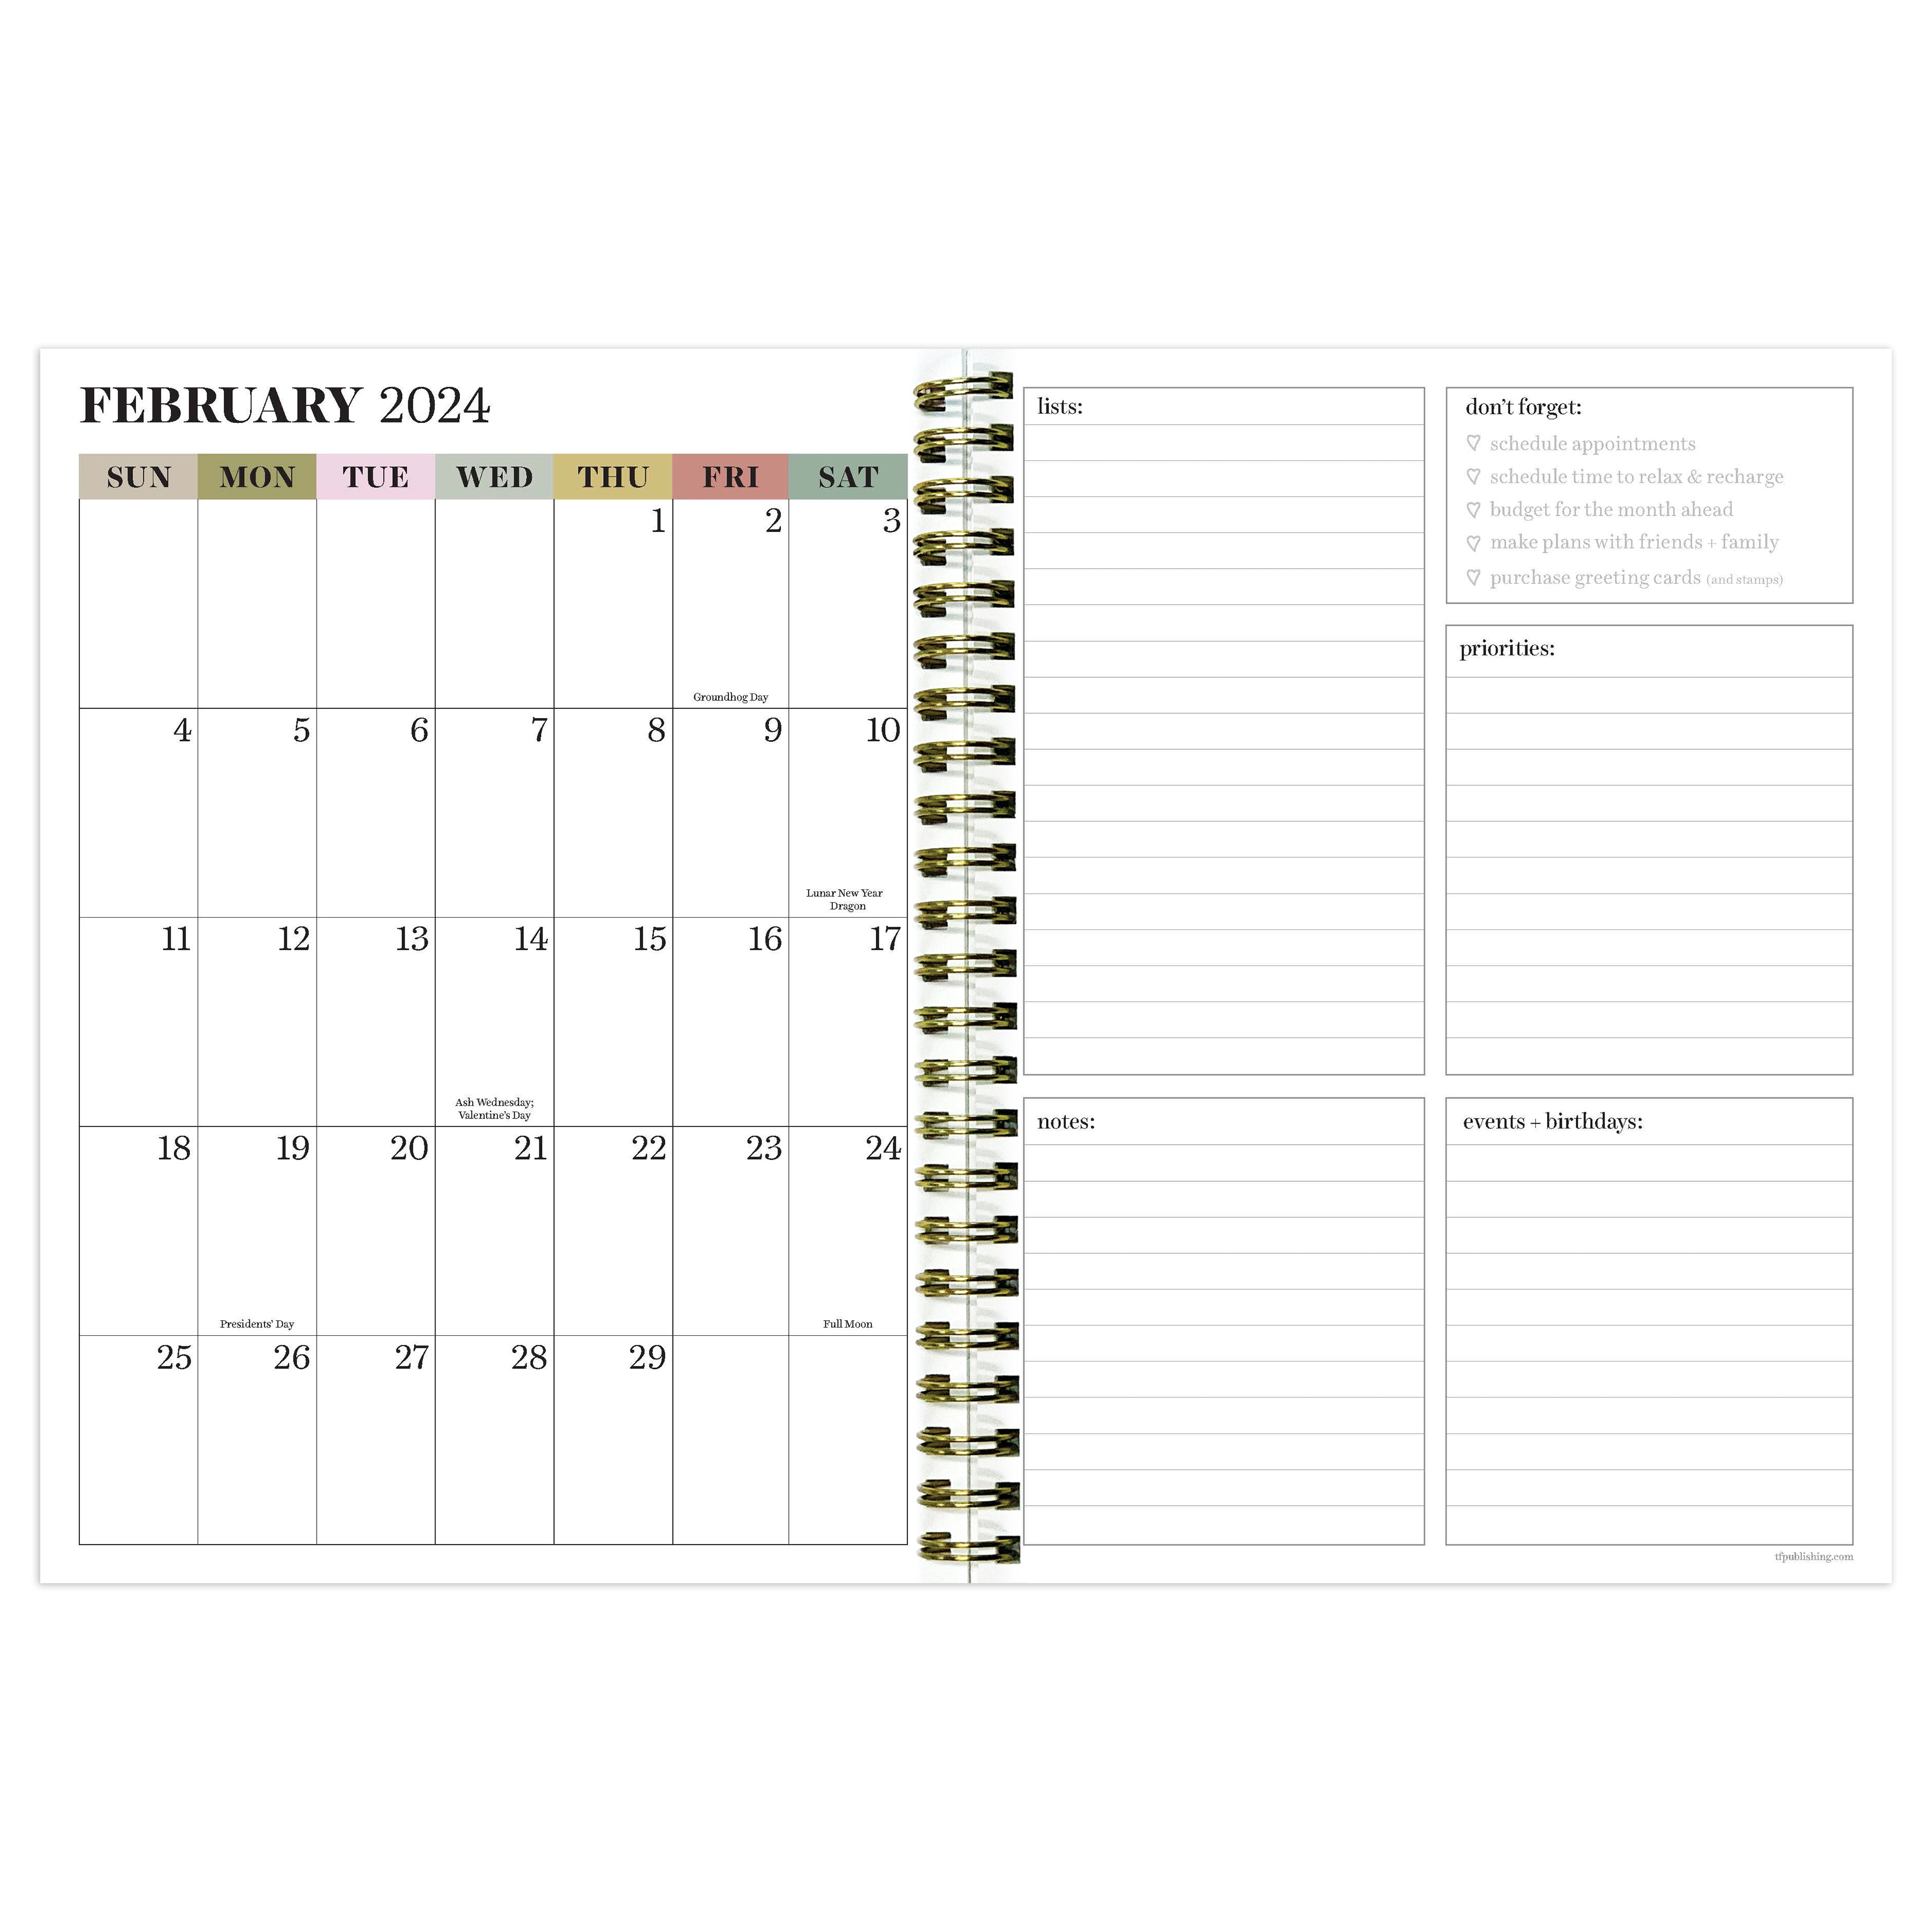 2024 Birds & Floral - Medium Weekly, Monthly Diary/Planner US